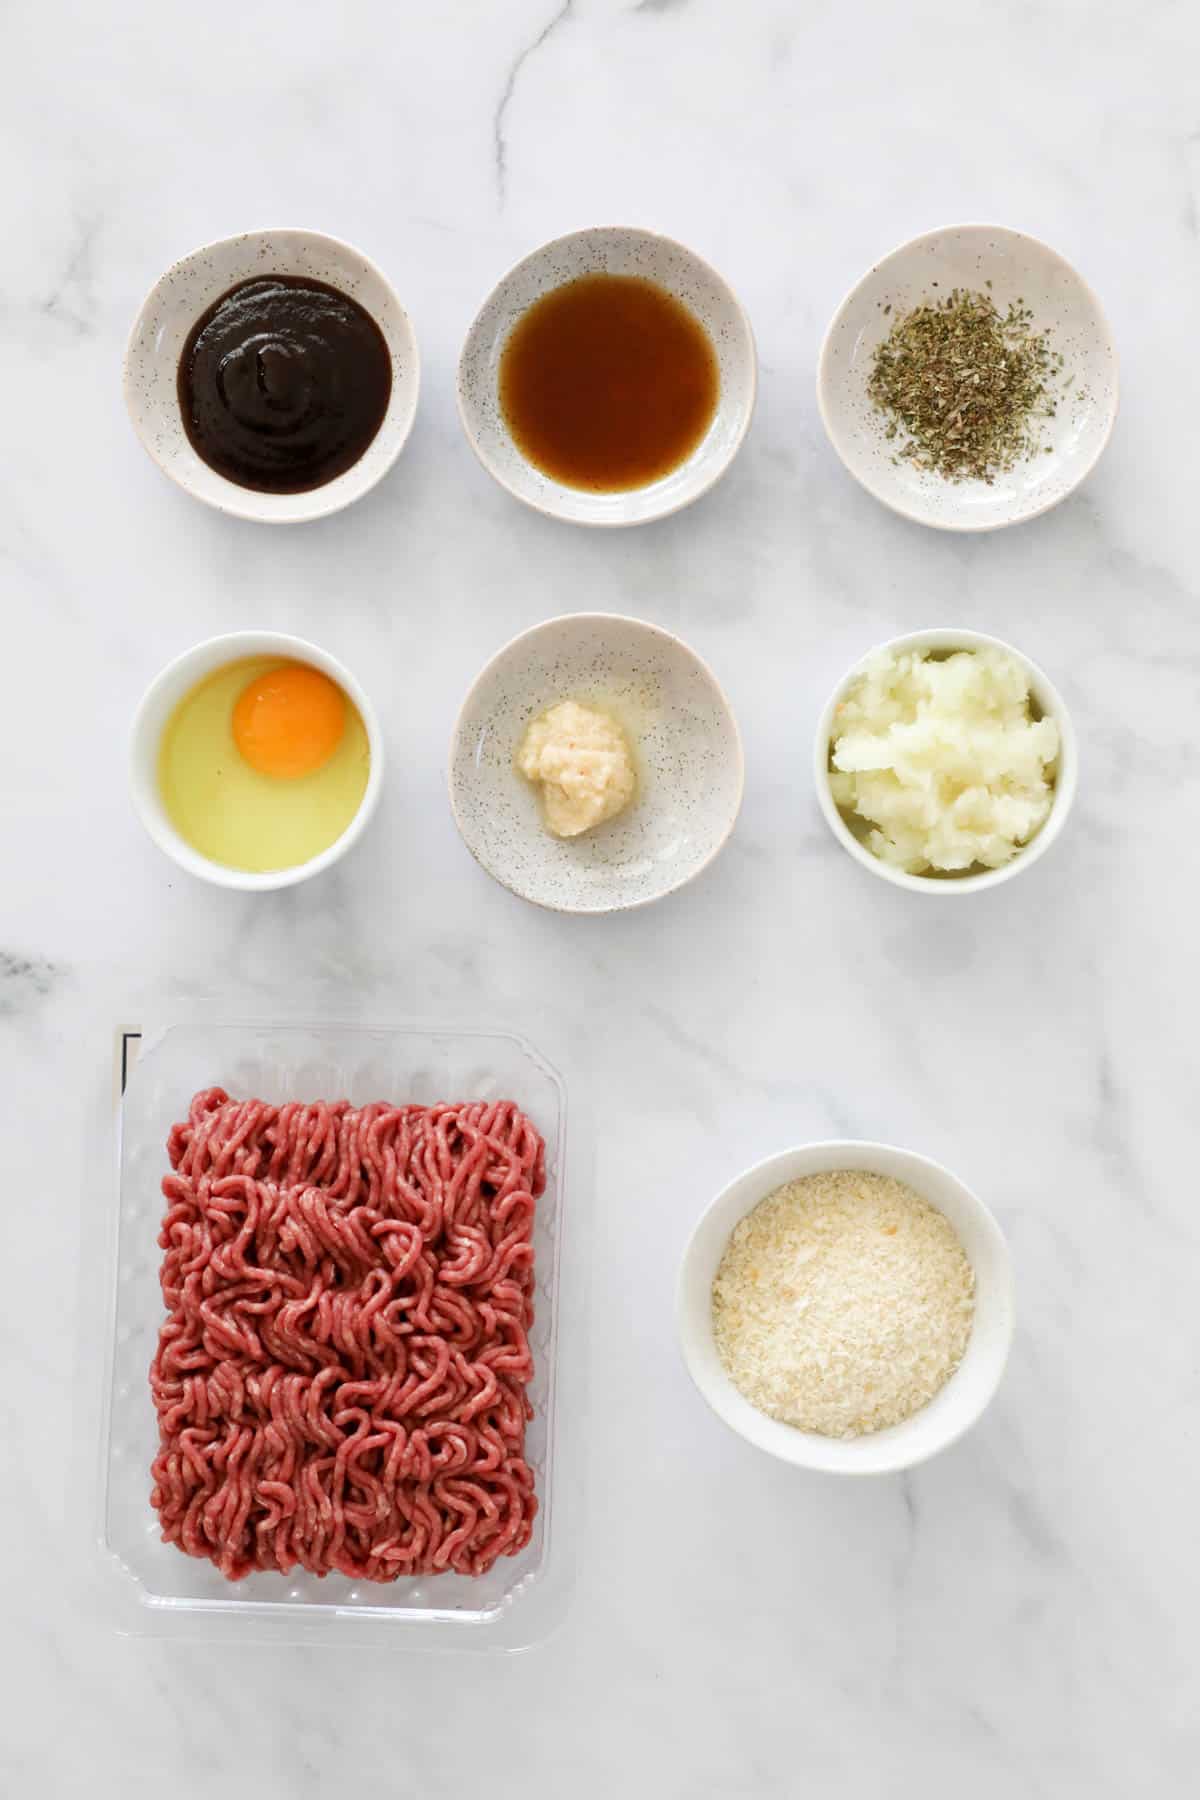 Ingredients to make beef patties in small bowls.